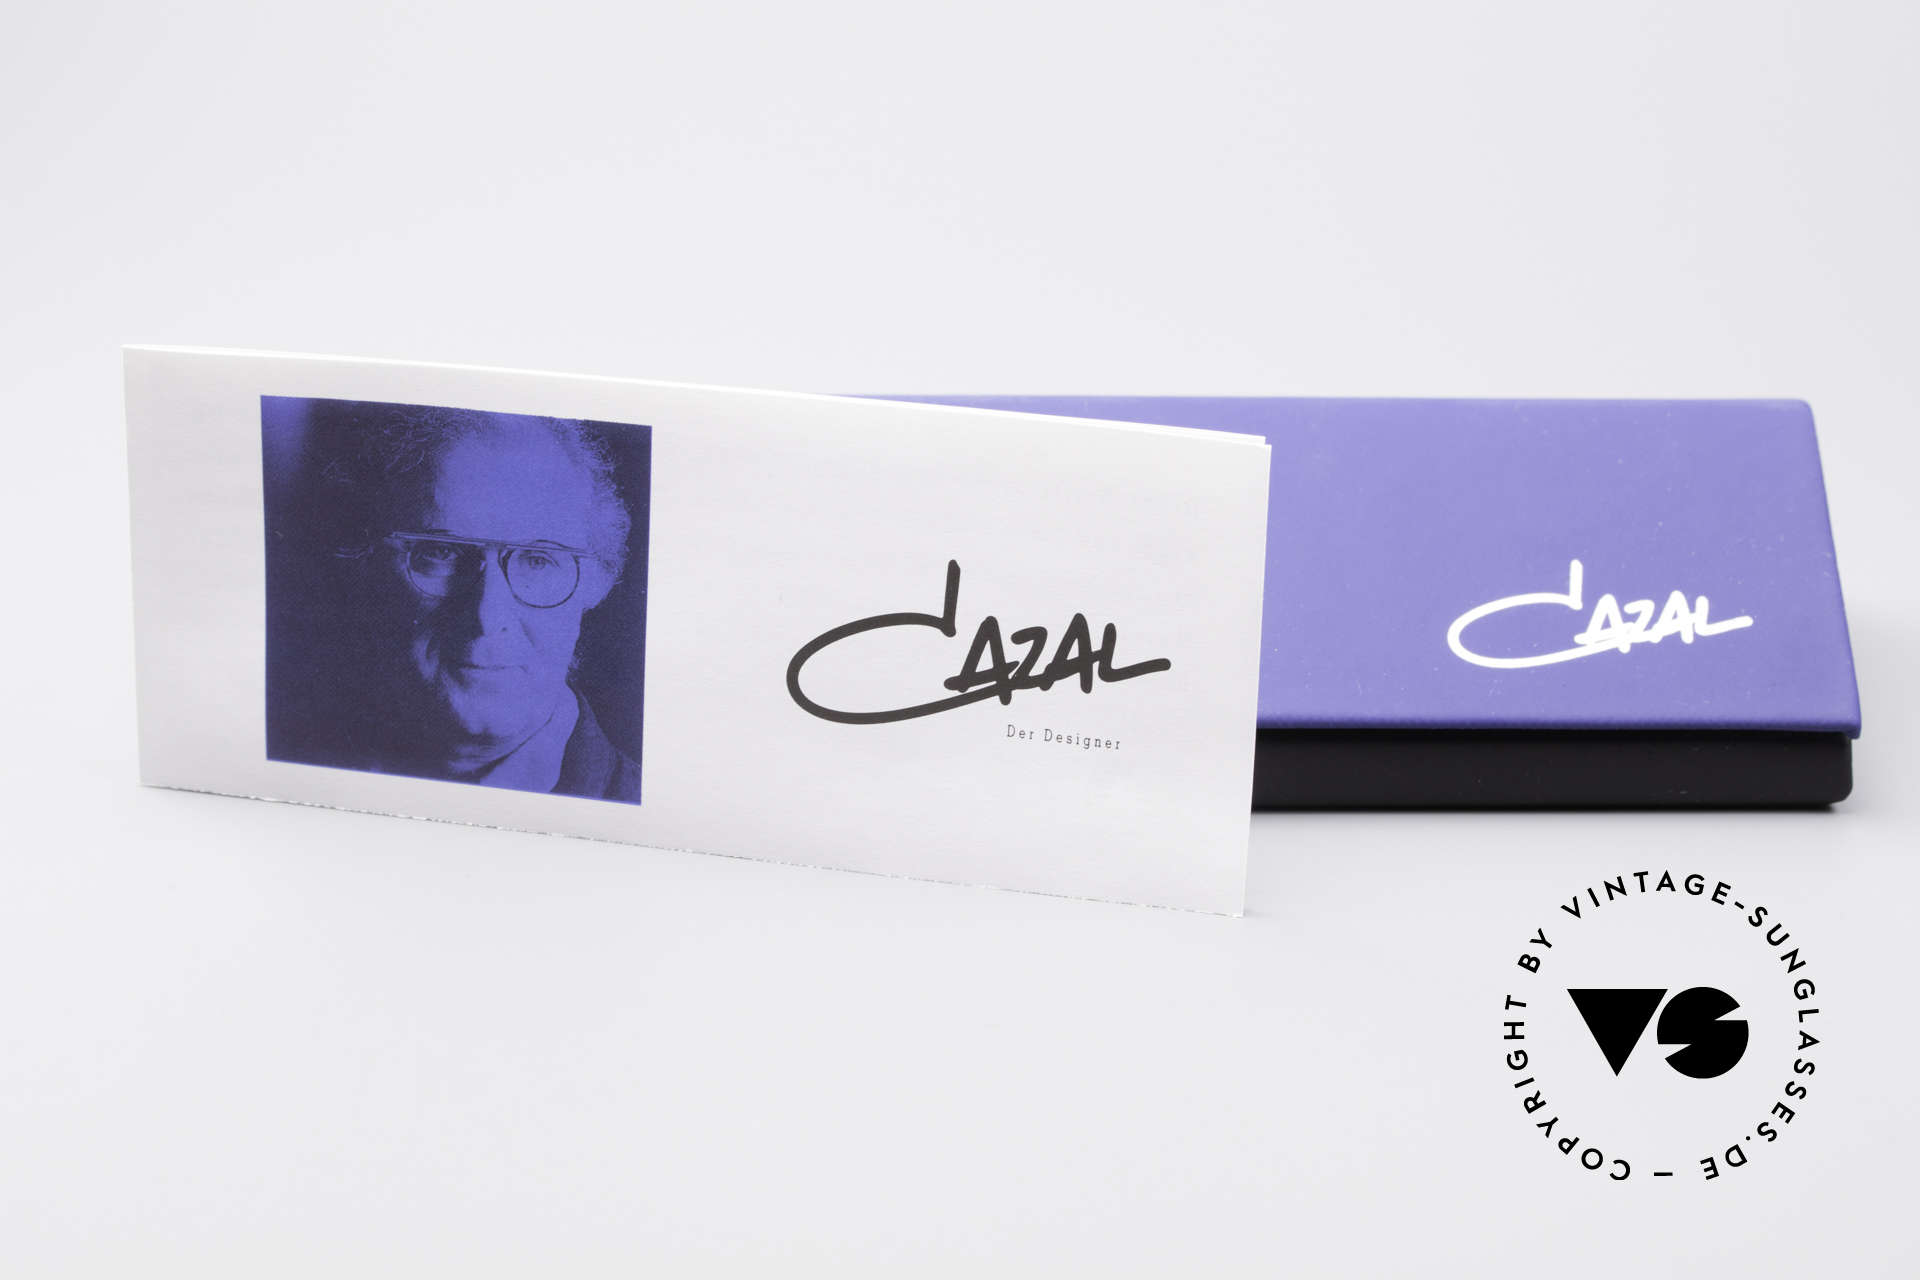 Cazal 244 Iconic Vintage Eyeglasses, the Cazal DEMO lenses can be replaced optionally, Made for Men and Women